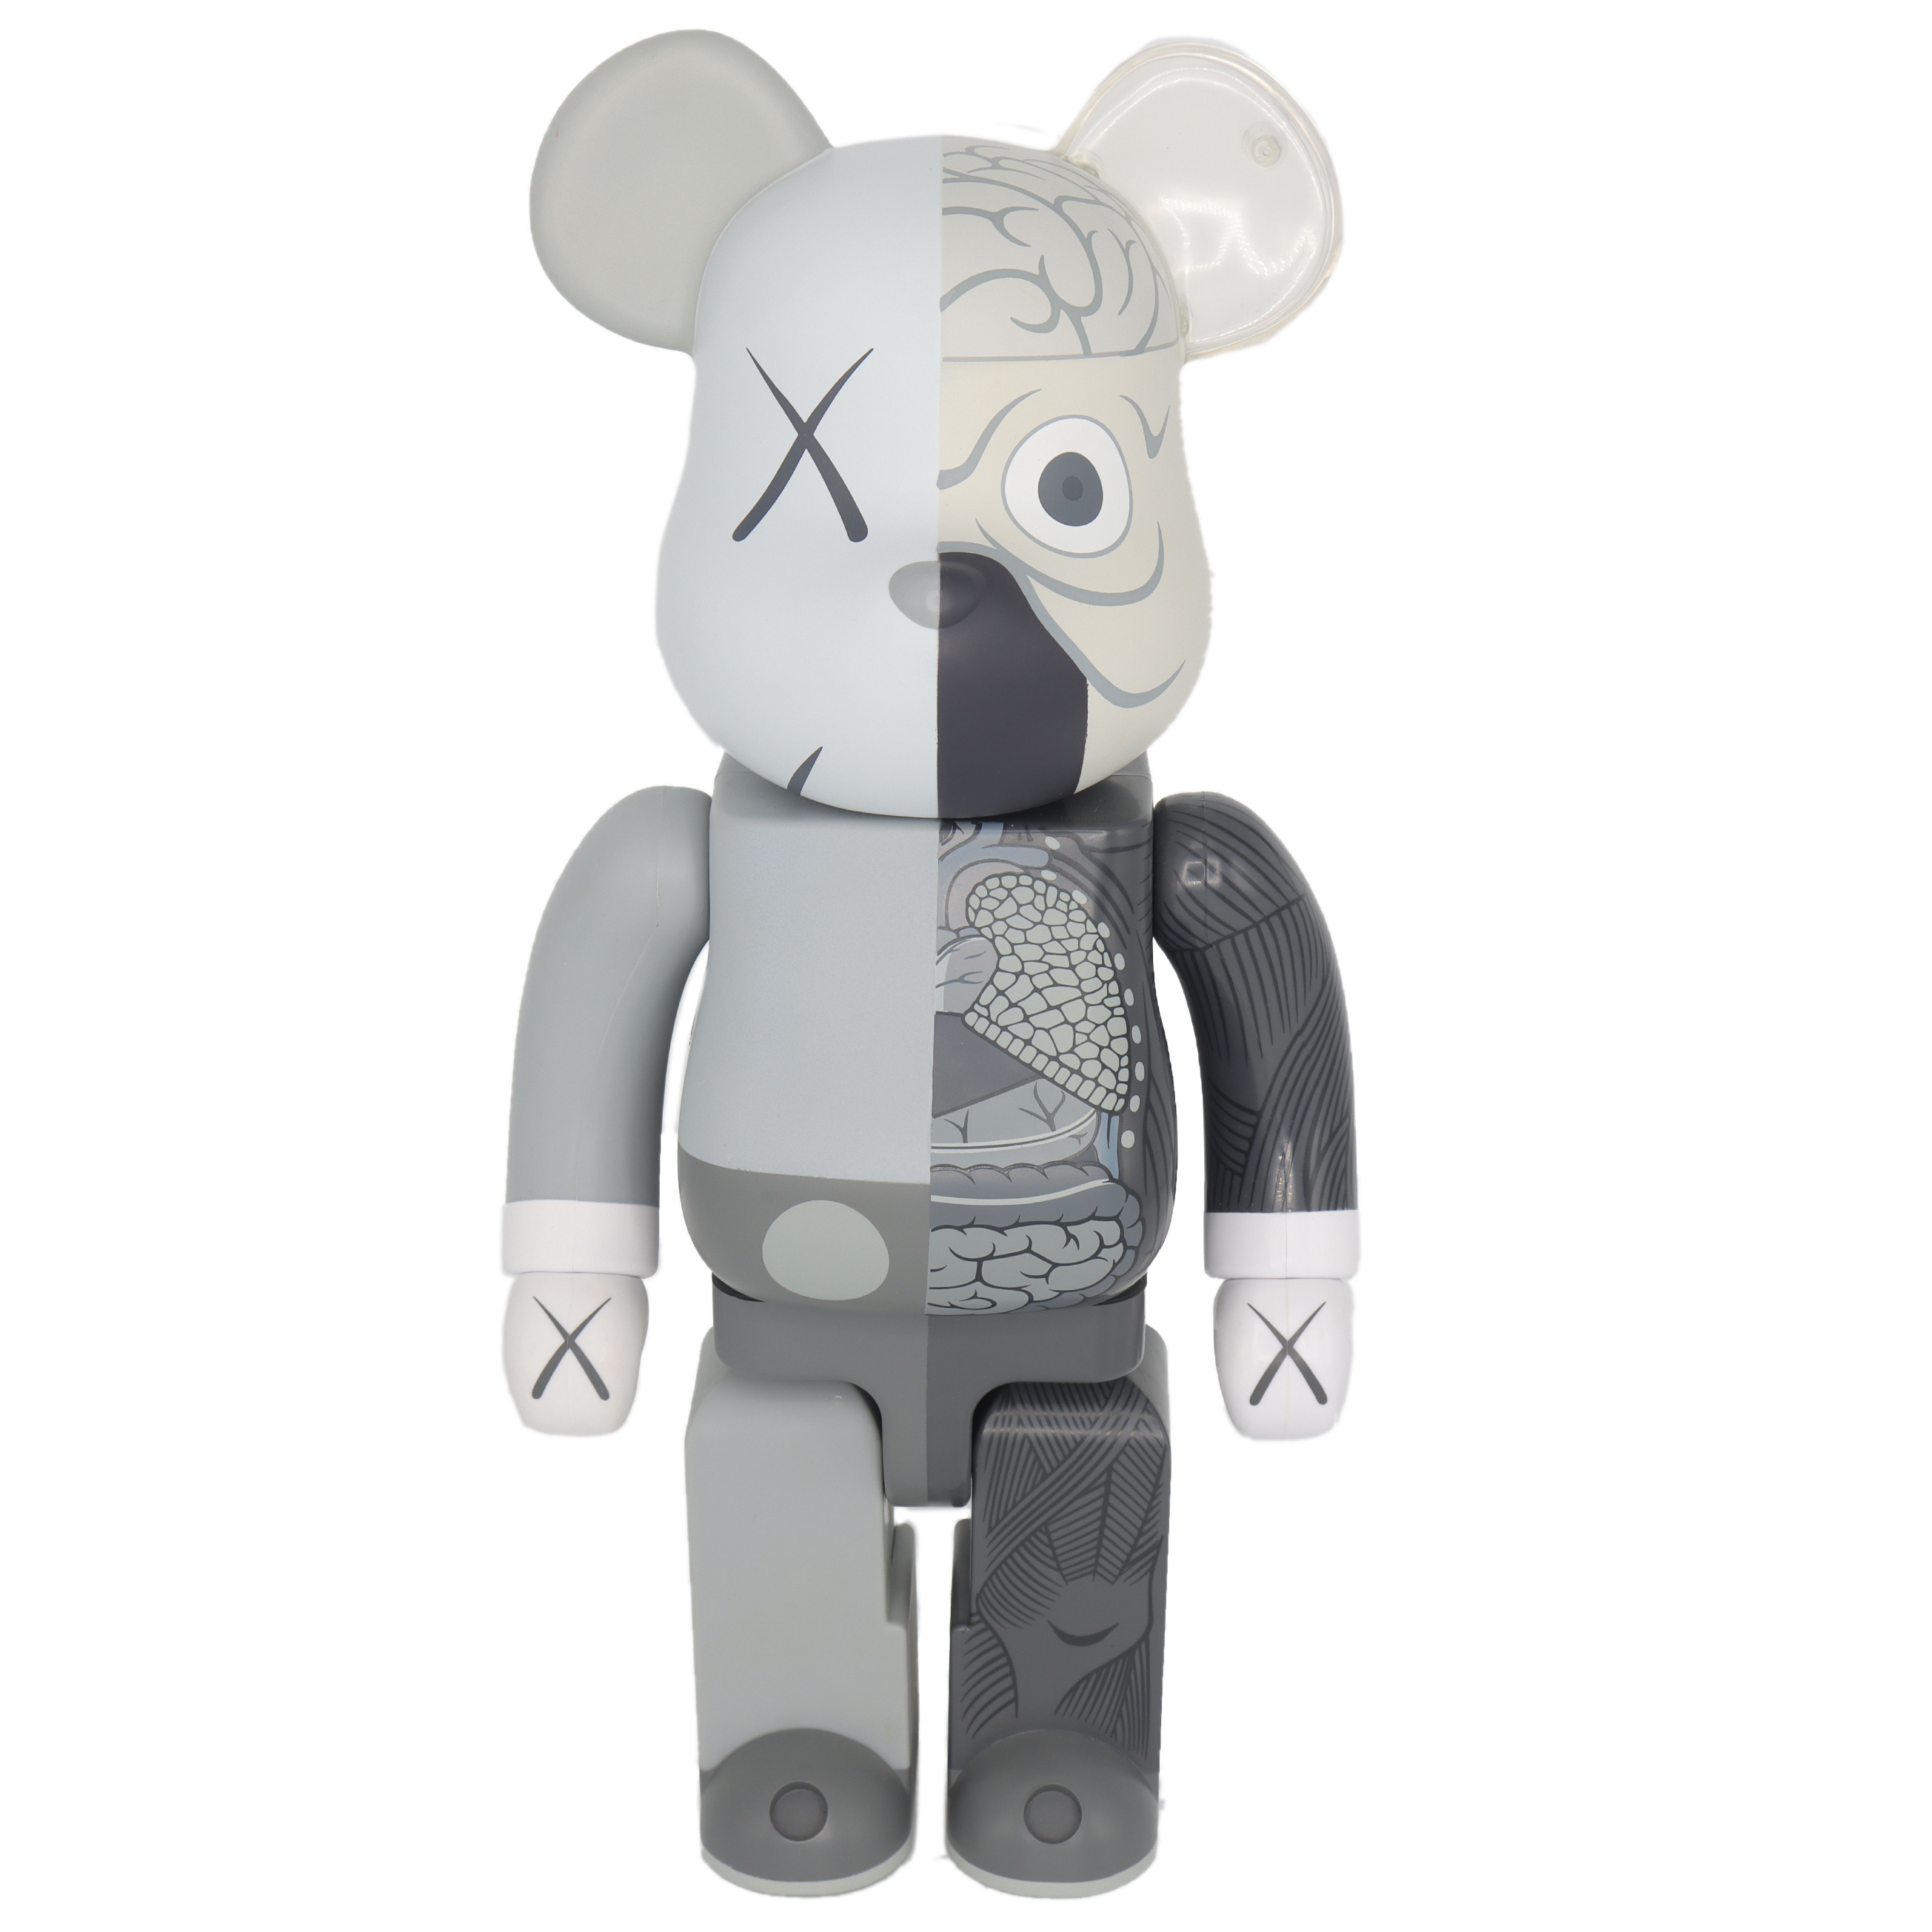 Dissected Bearbrick 400% Companion (Grey), 2010